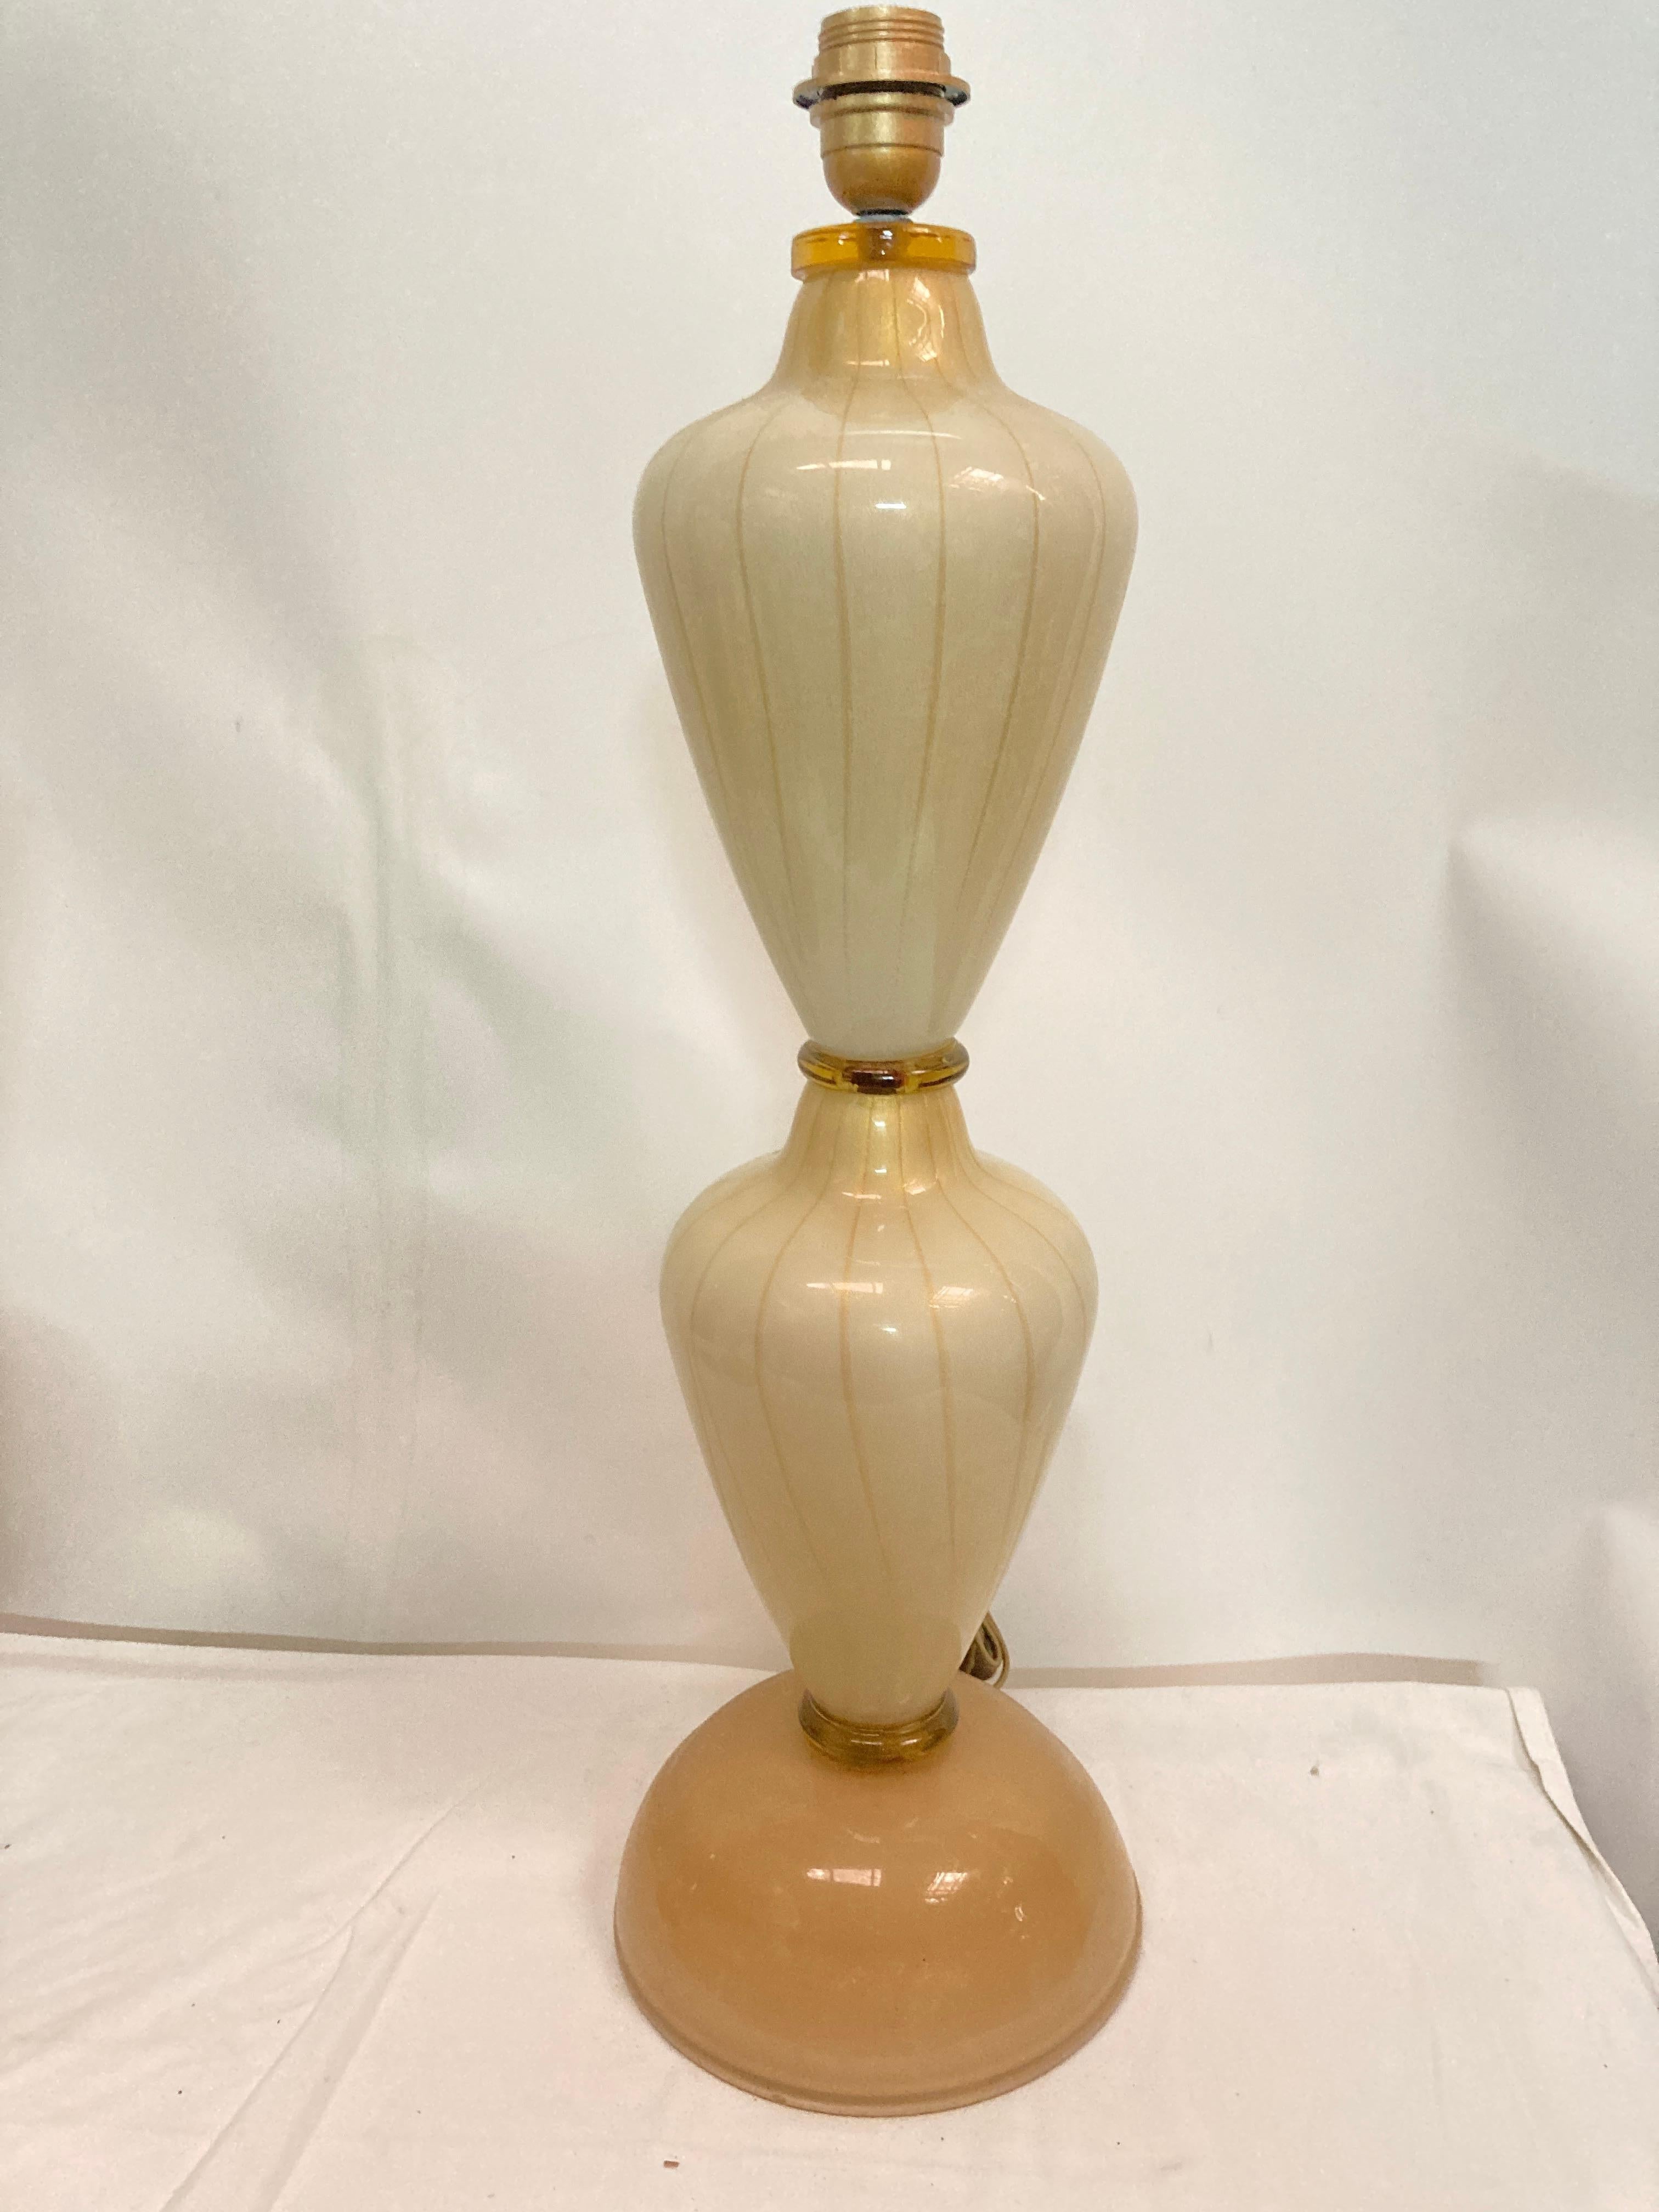 Pair of tall Murano lamps in the style of Paolo Veronese
Italy
1970's
Re-wired
No shade included